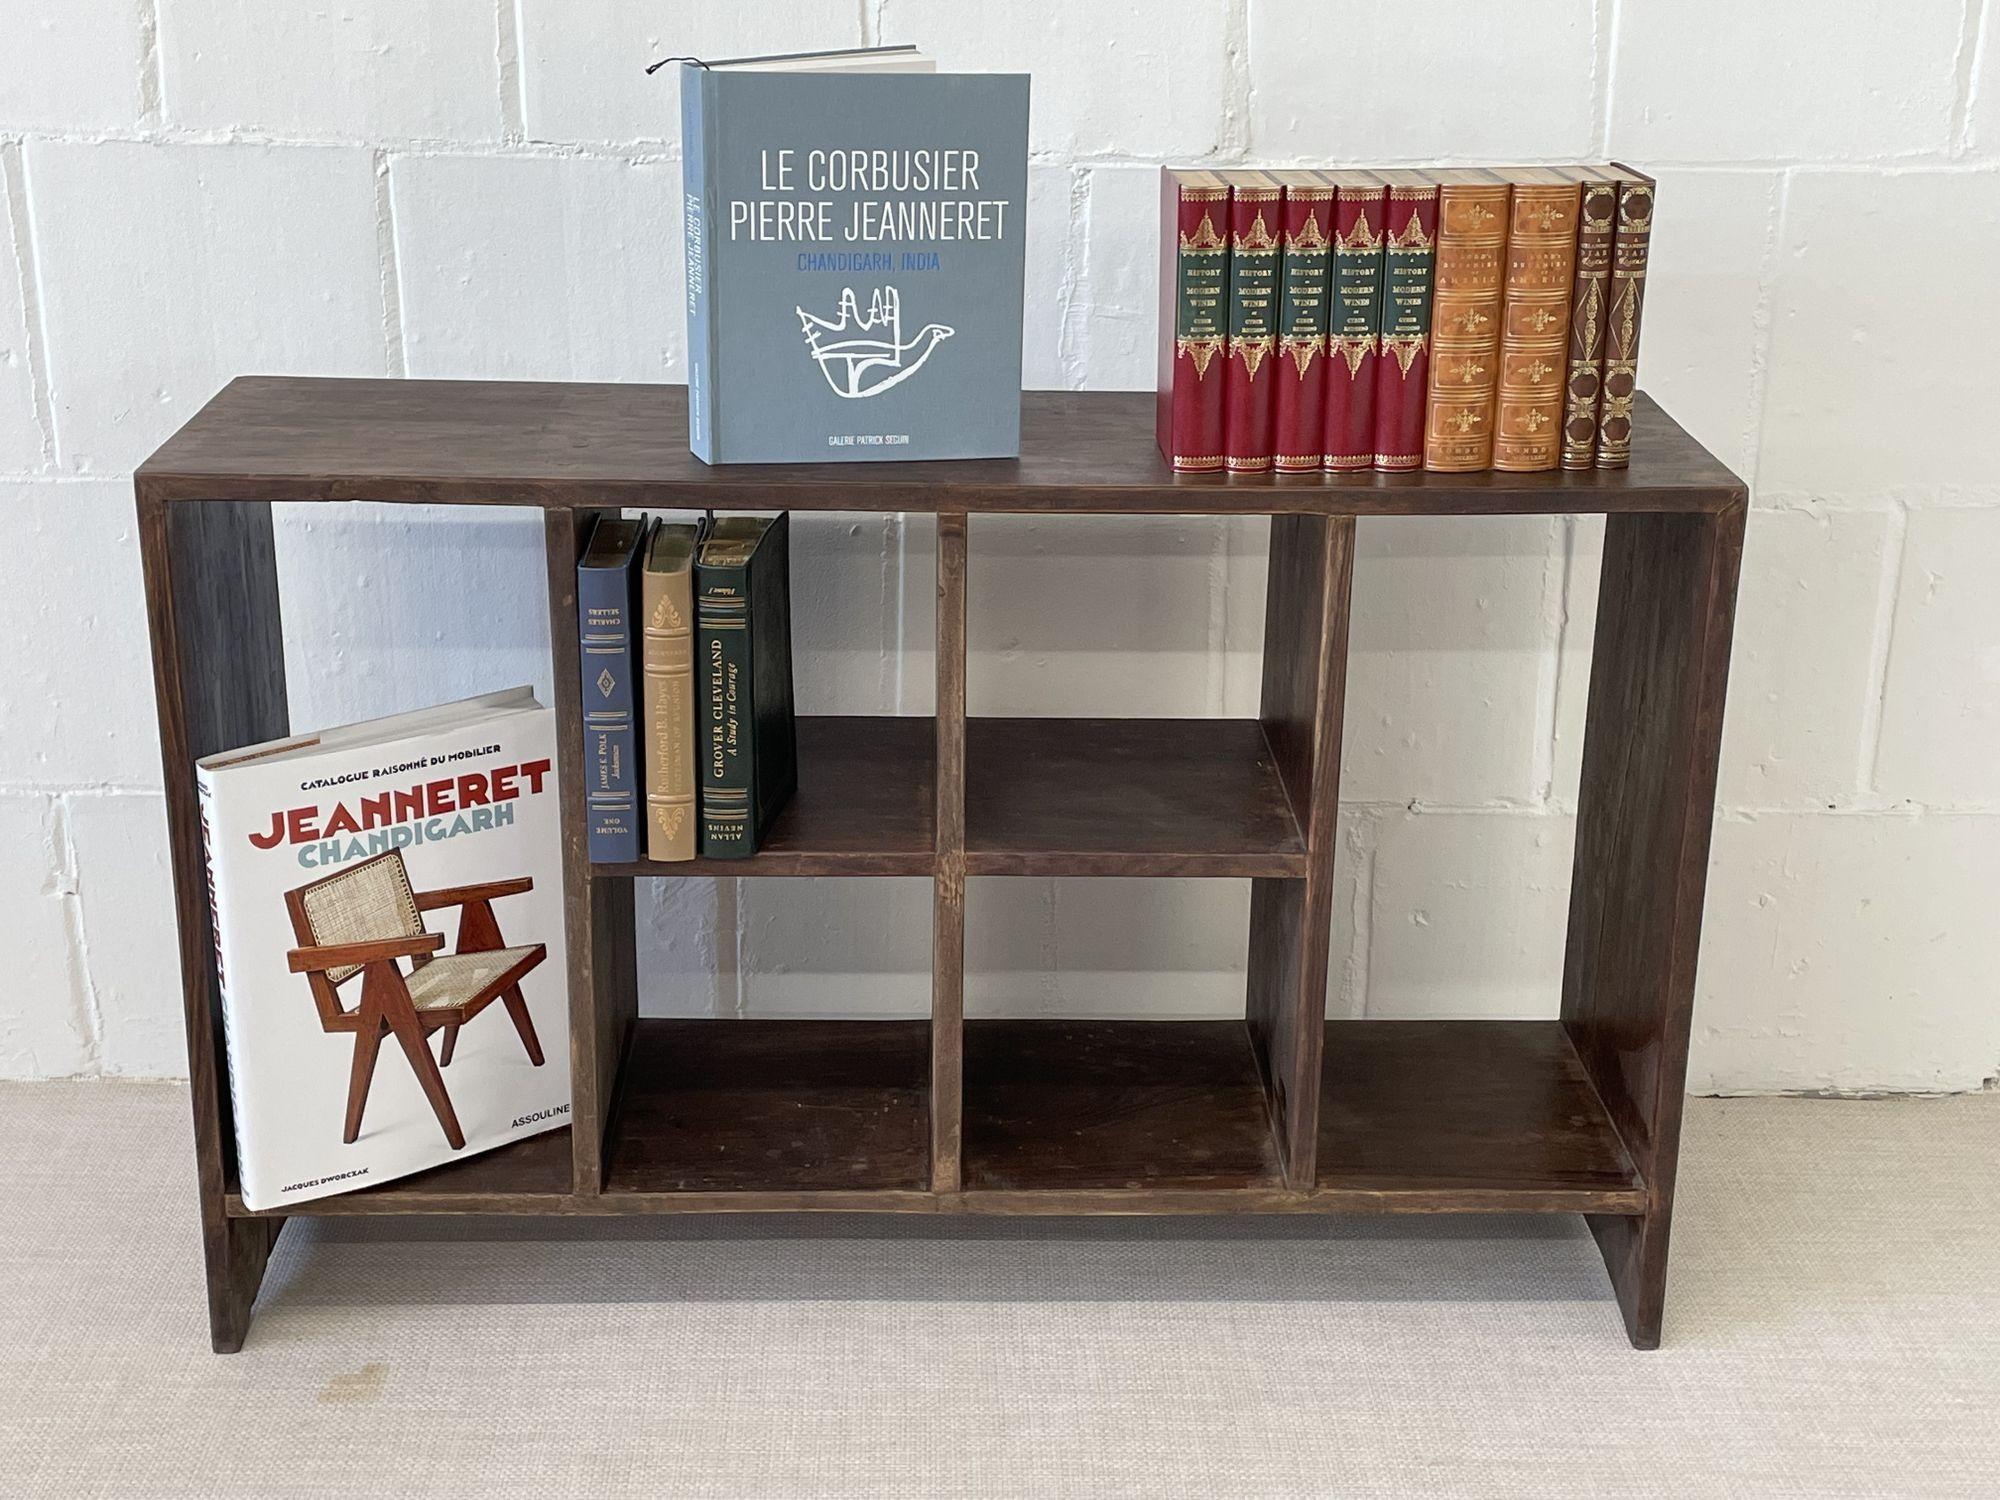 Two Pierre Jeanneret bookcases, shelving unit, file rack, Model PJ-R-27-A
 
Provenance: Punjab University Chemistry Lab
 
France, India, c. 1960s
Solid Teak
 
Each with markings indicating provenance - These are authentic and directly from